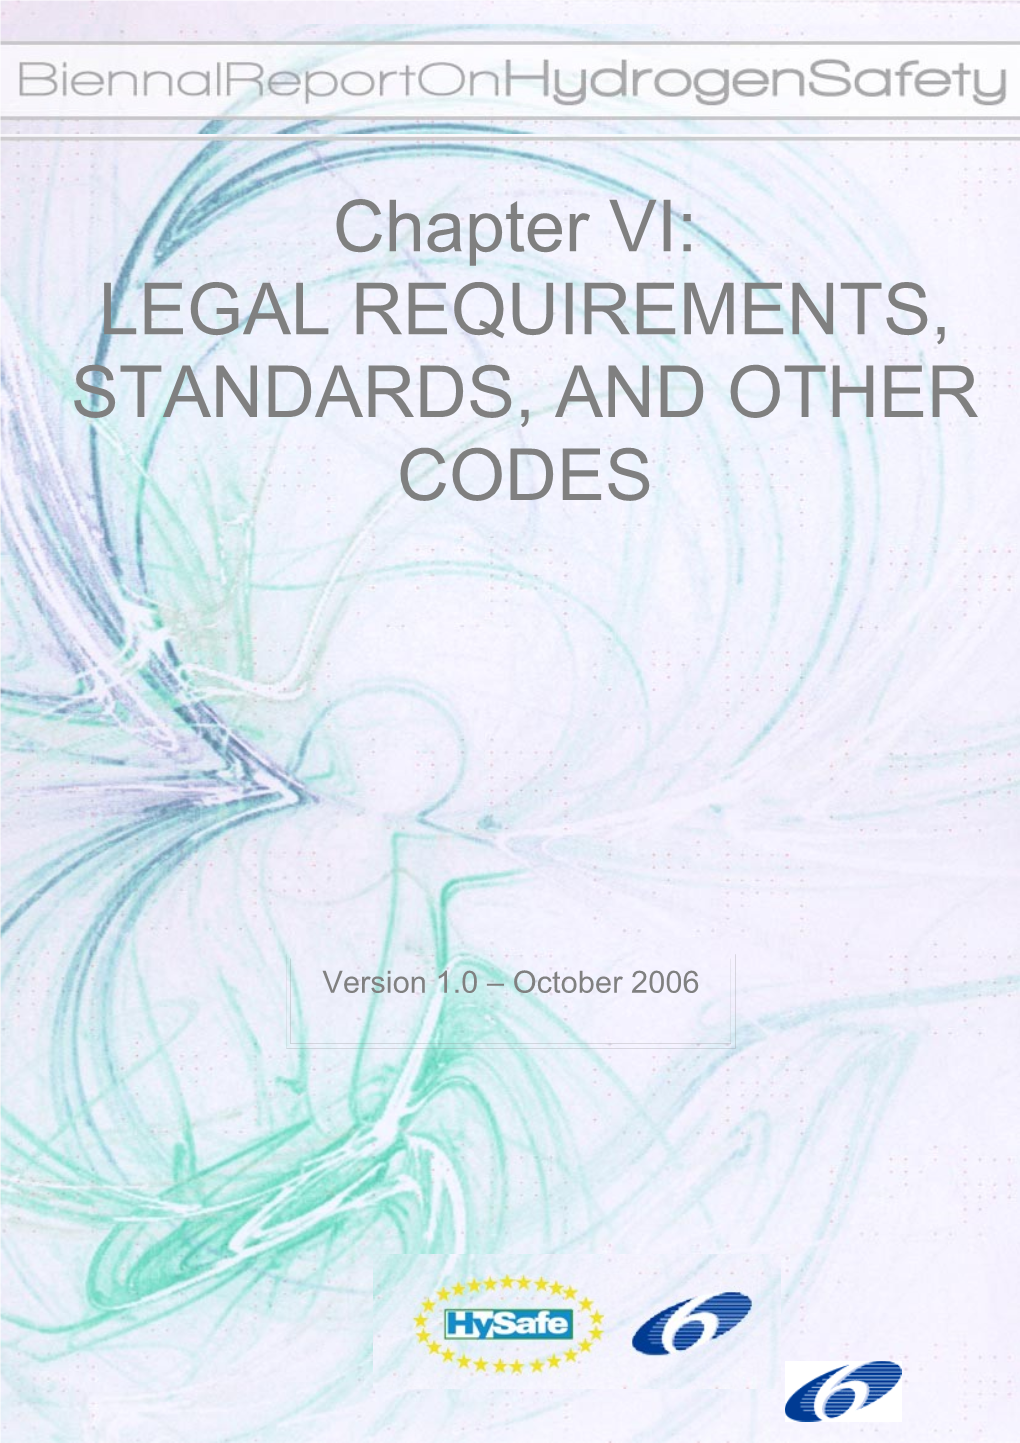 Chapter VI: LEGAL REQUIREMENTS, STANDARDS, and OTHER CODES